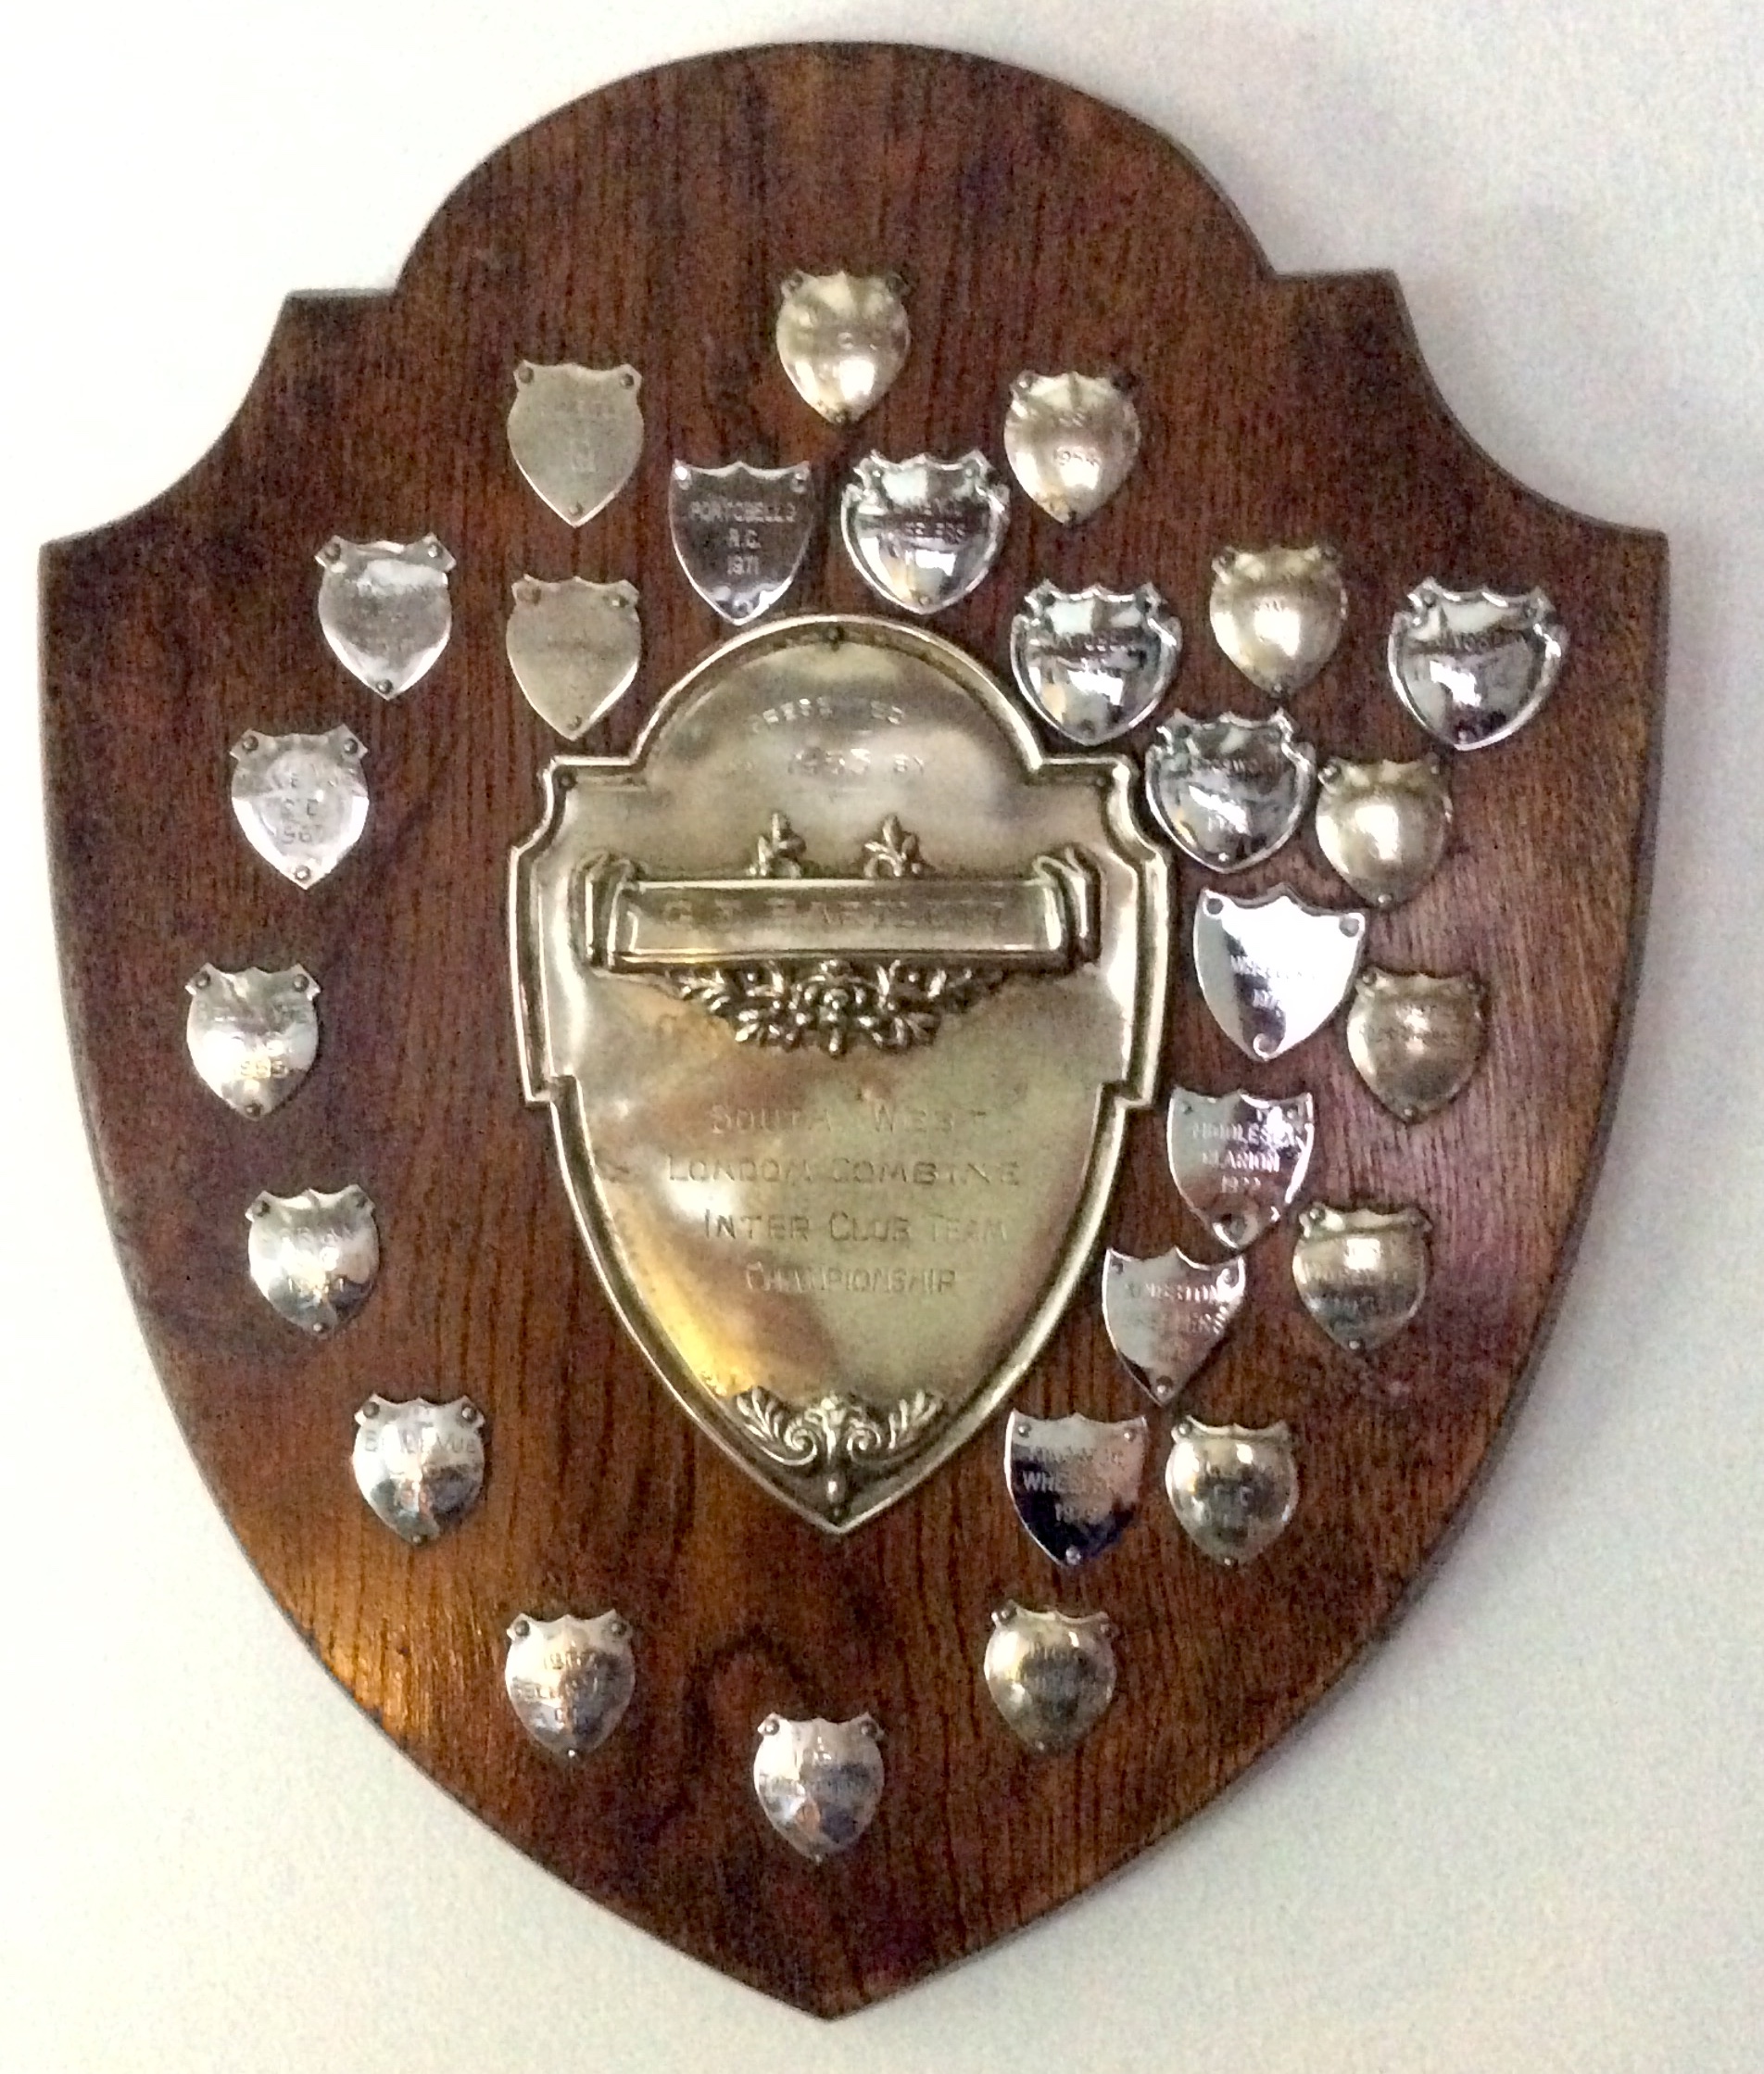 Large 1953 London Cycling Trophy Shield - Image 5 of 8